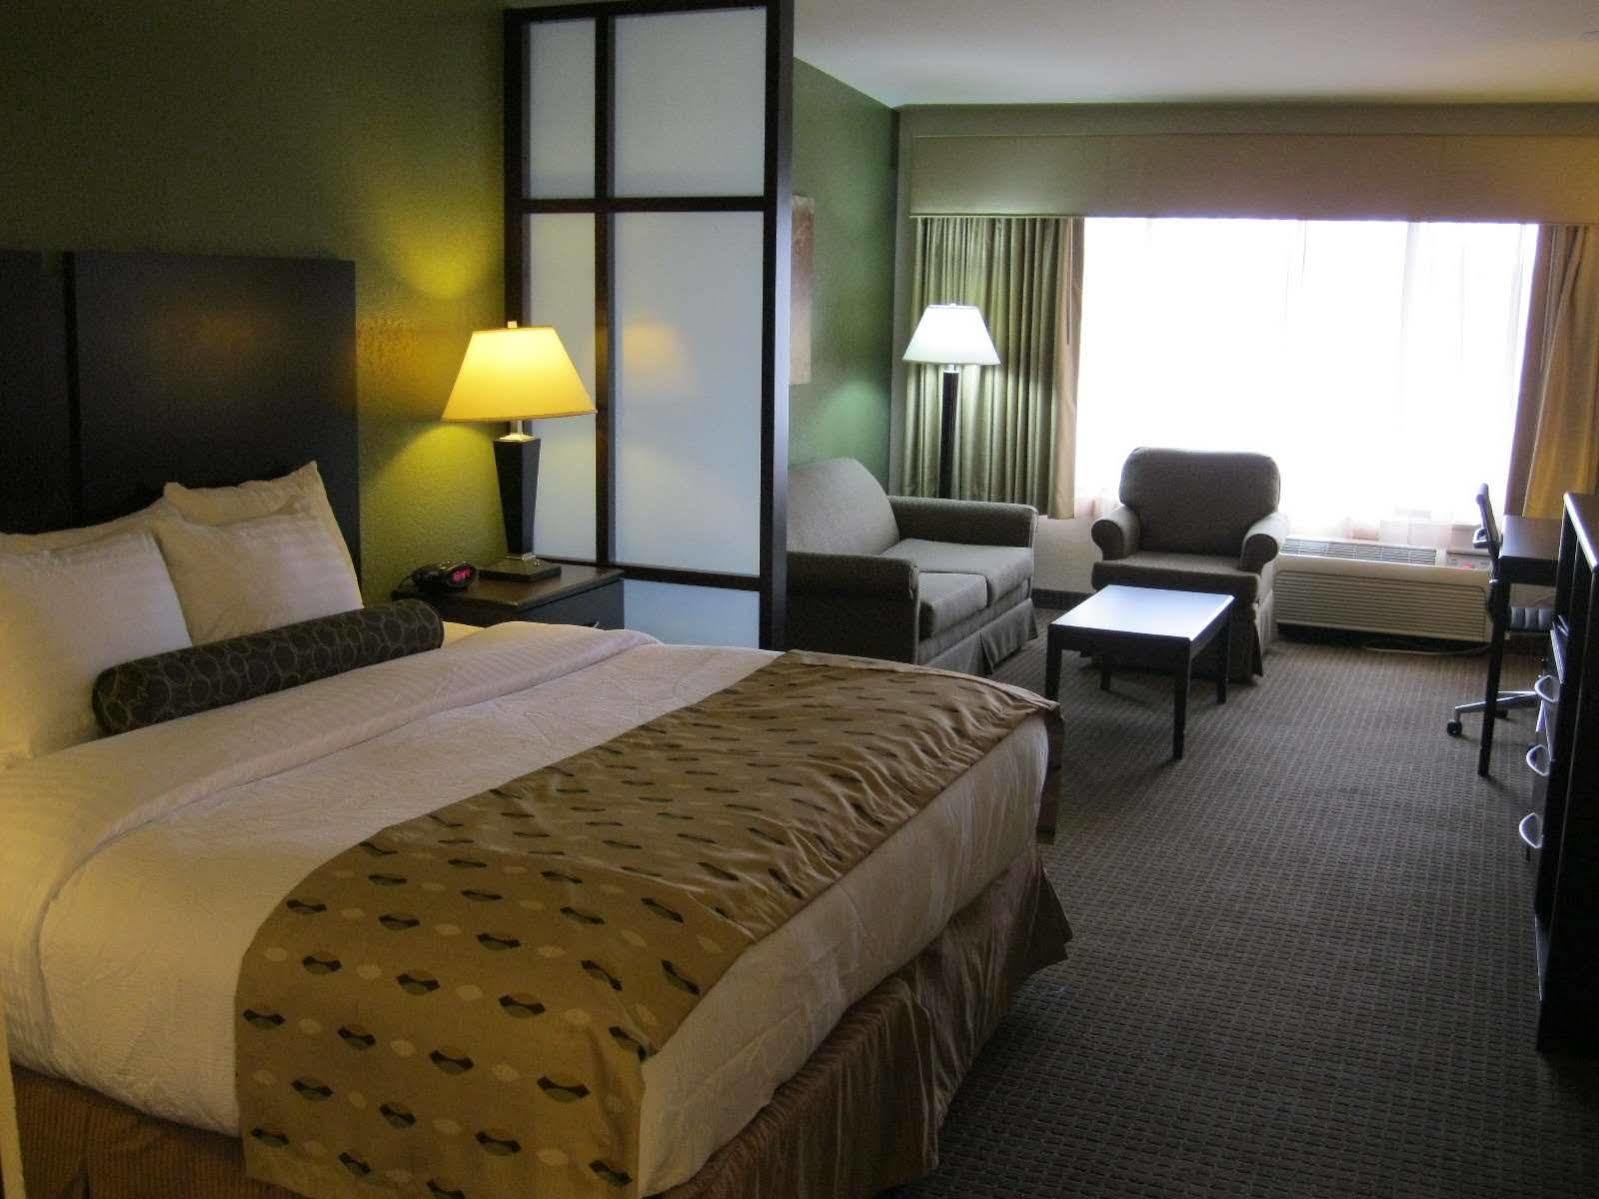 Antioch Hotel & Suites Room photo